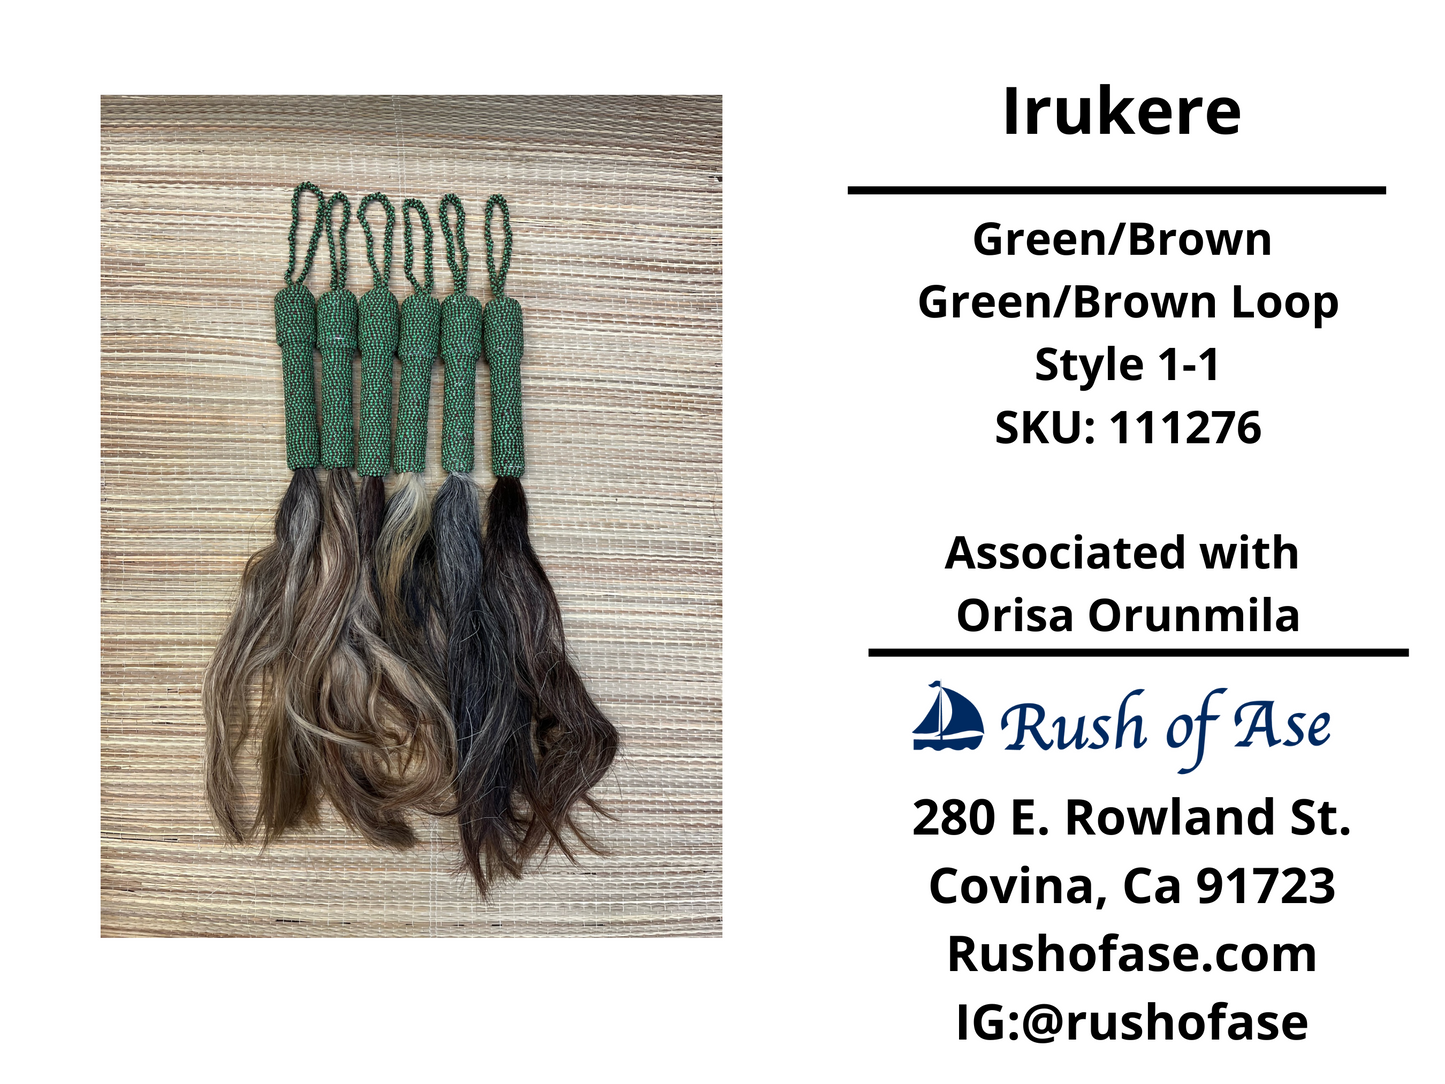 Irukere Small | Horsetail-fly-whisk | cow tail -fly-whisk  | Sheep Wool fly-whisk